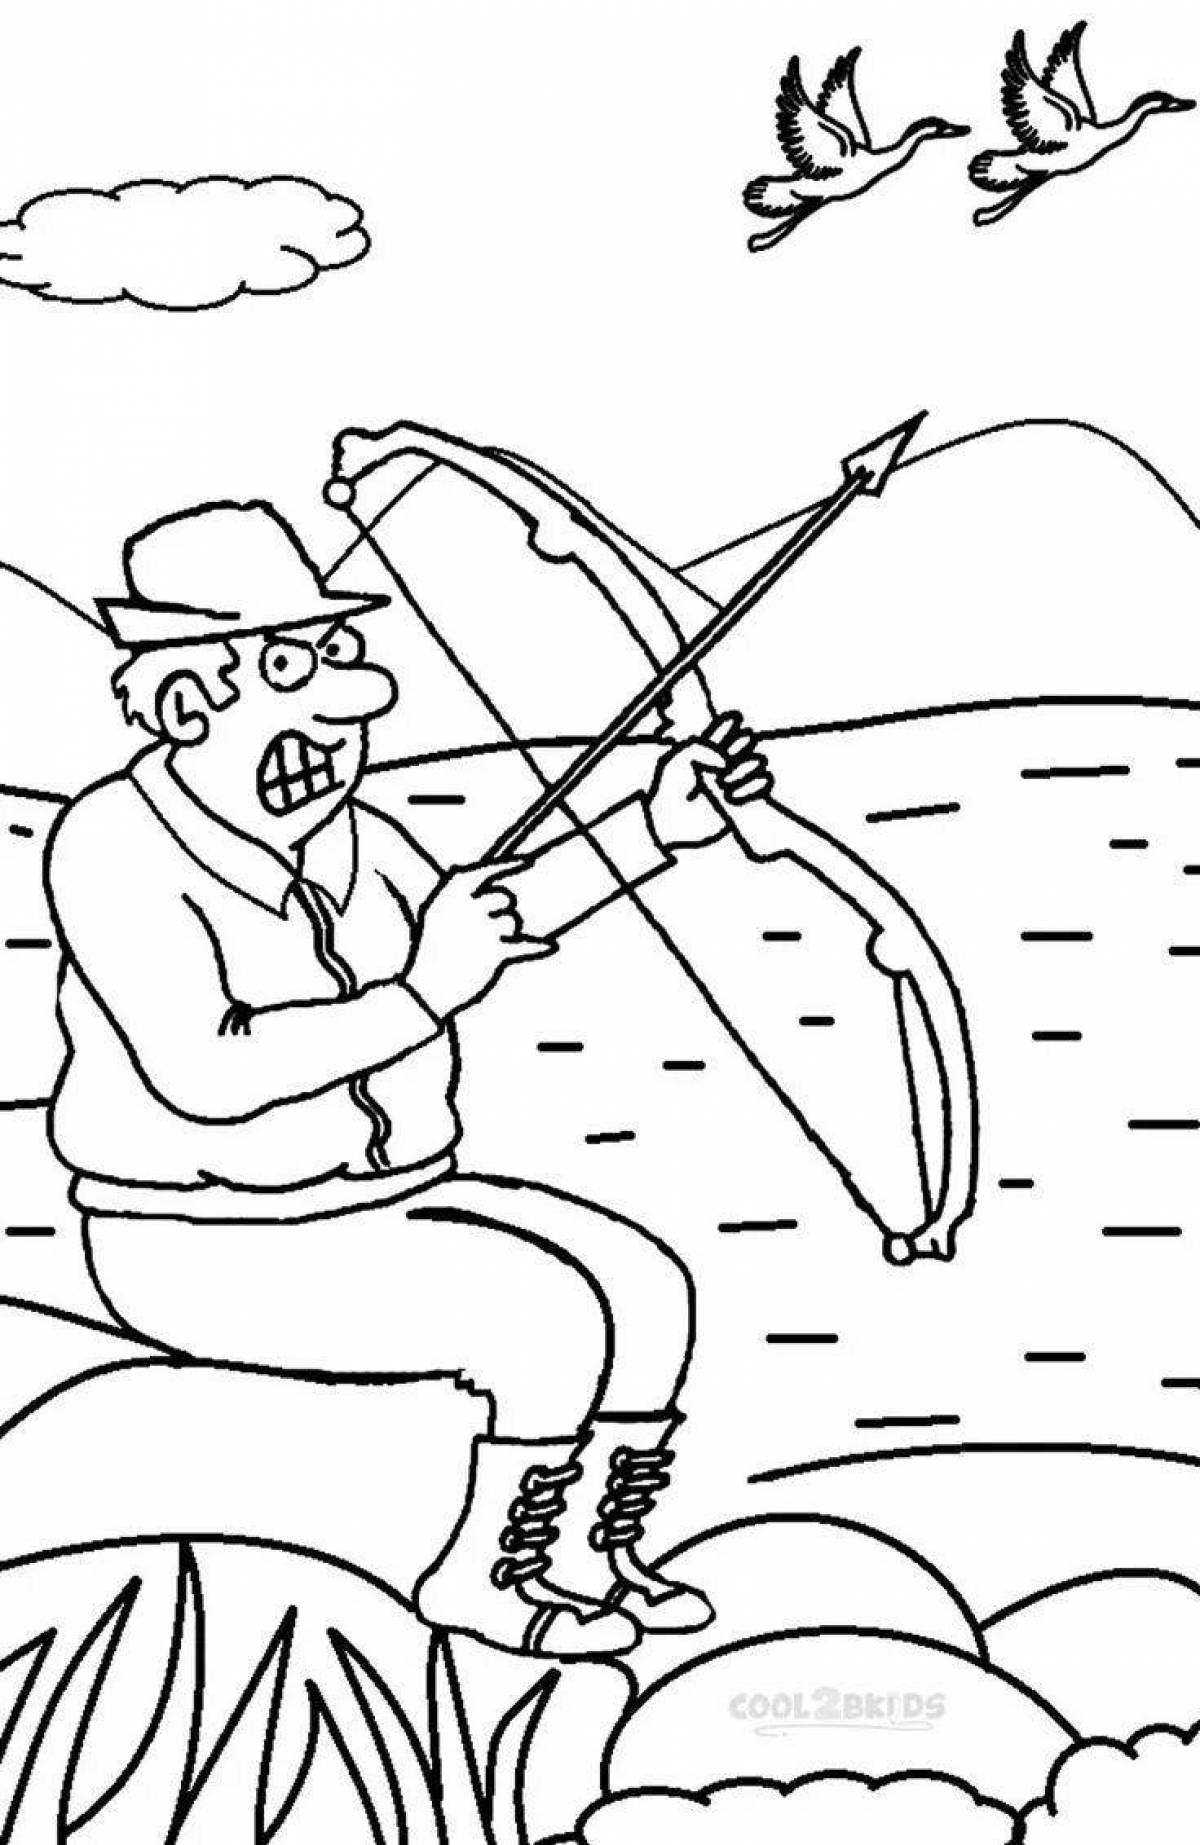 Coloring page determined hunter with a gun